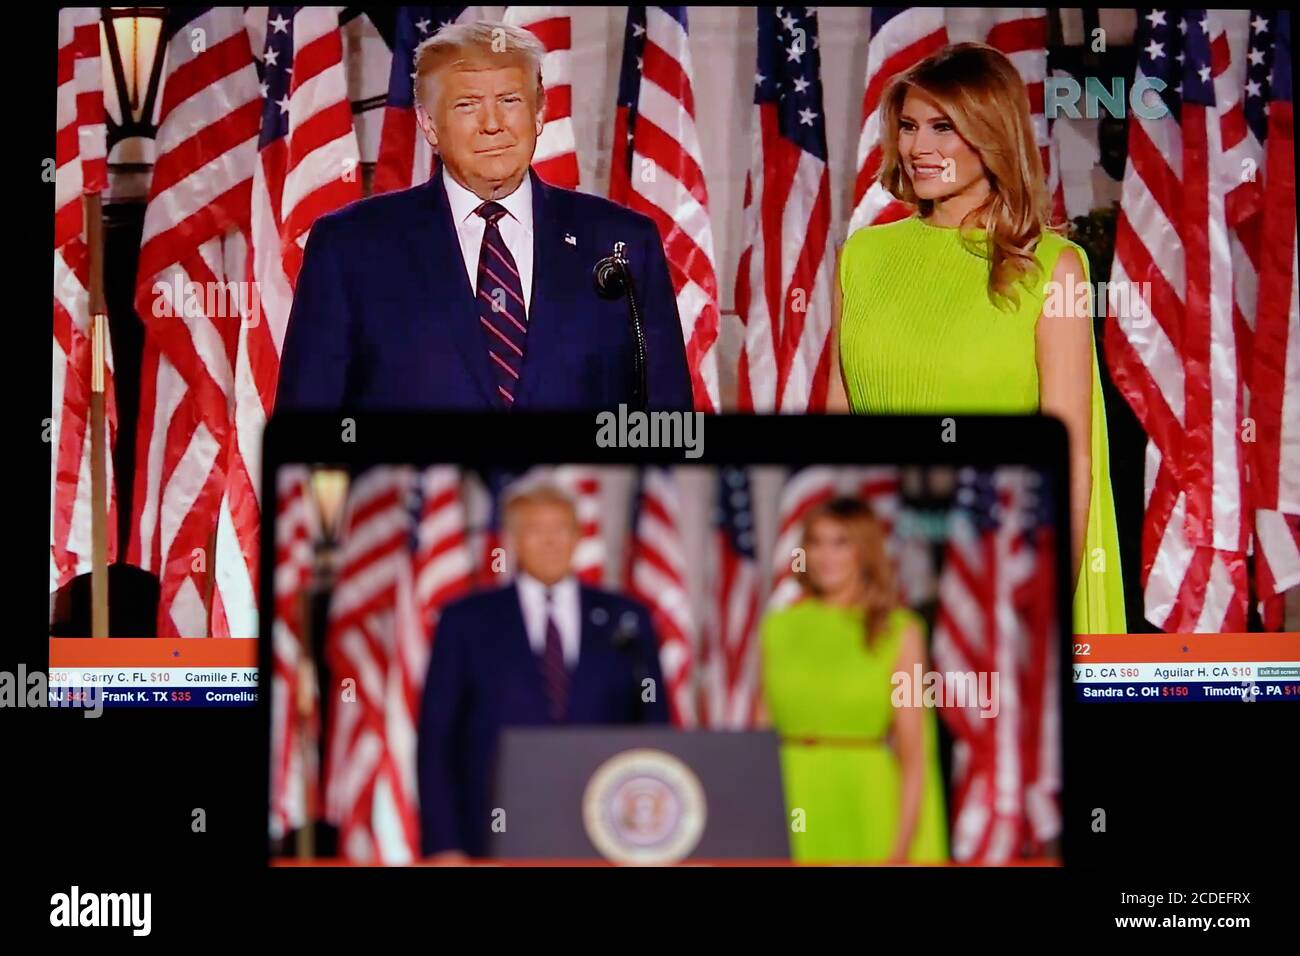 Washington, USA. 28th Aug, 2020. Photo taken in Arlington, Virginia, the United States, on Aug. 27, 2020 shows screens displaying U.S. President Donald Trump and U.S. first lady Melania Trump arriving on stage for the 2020 Republican National Convention. Trump accepted the Republican Party's nomination for reelection in a speech from the White House South Lawn on Thursday night. Credit: Liu Jie/Xinhua/Alamy Live News Stock Photo